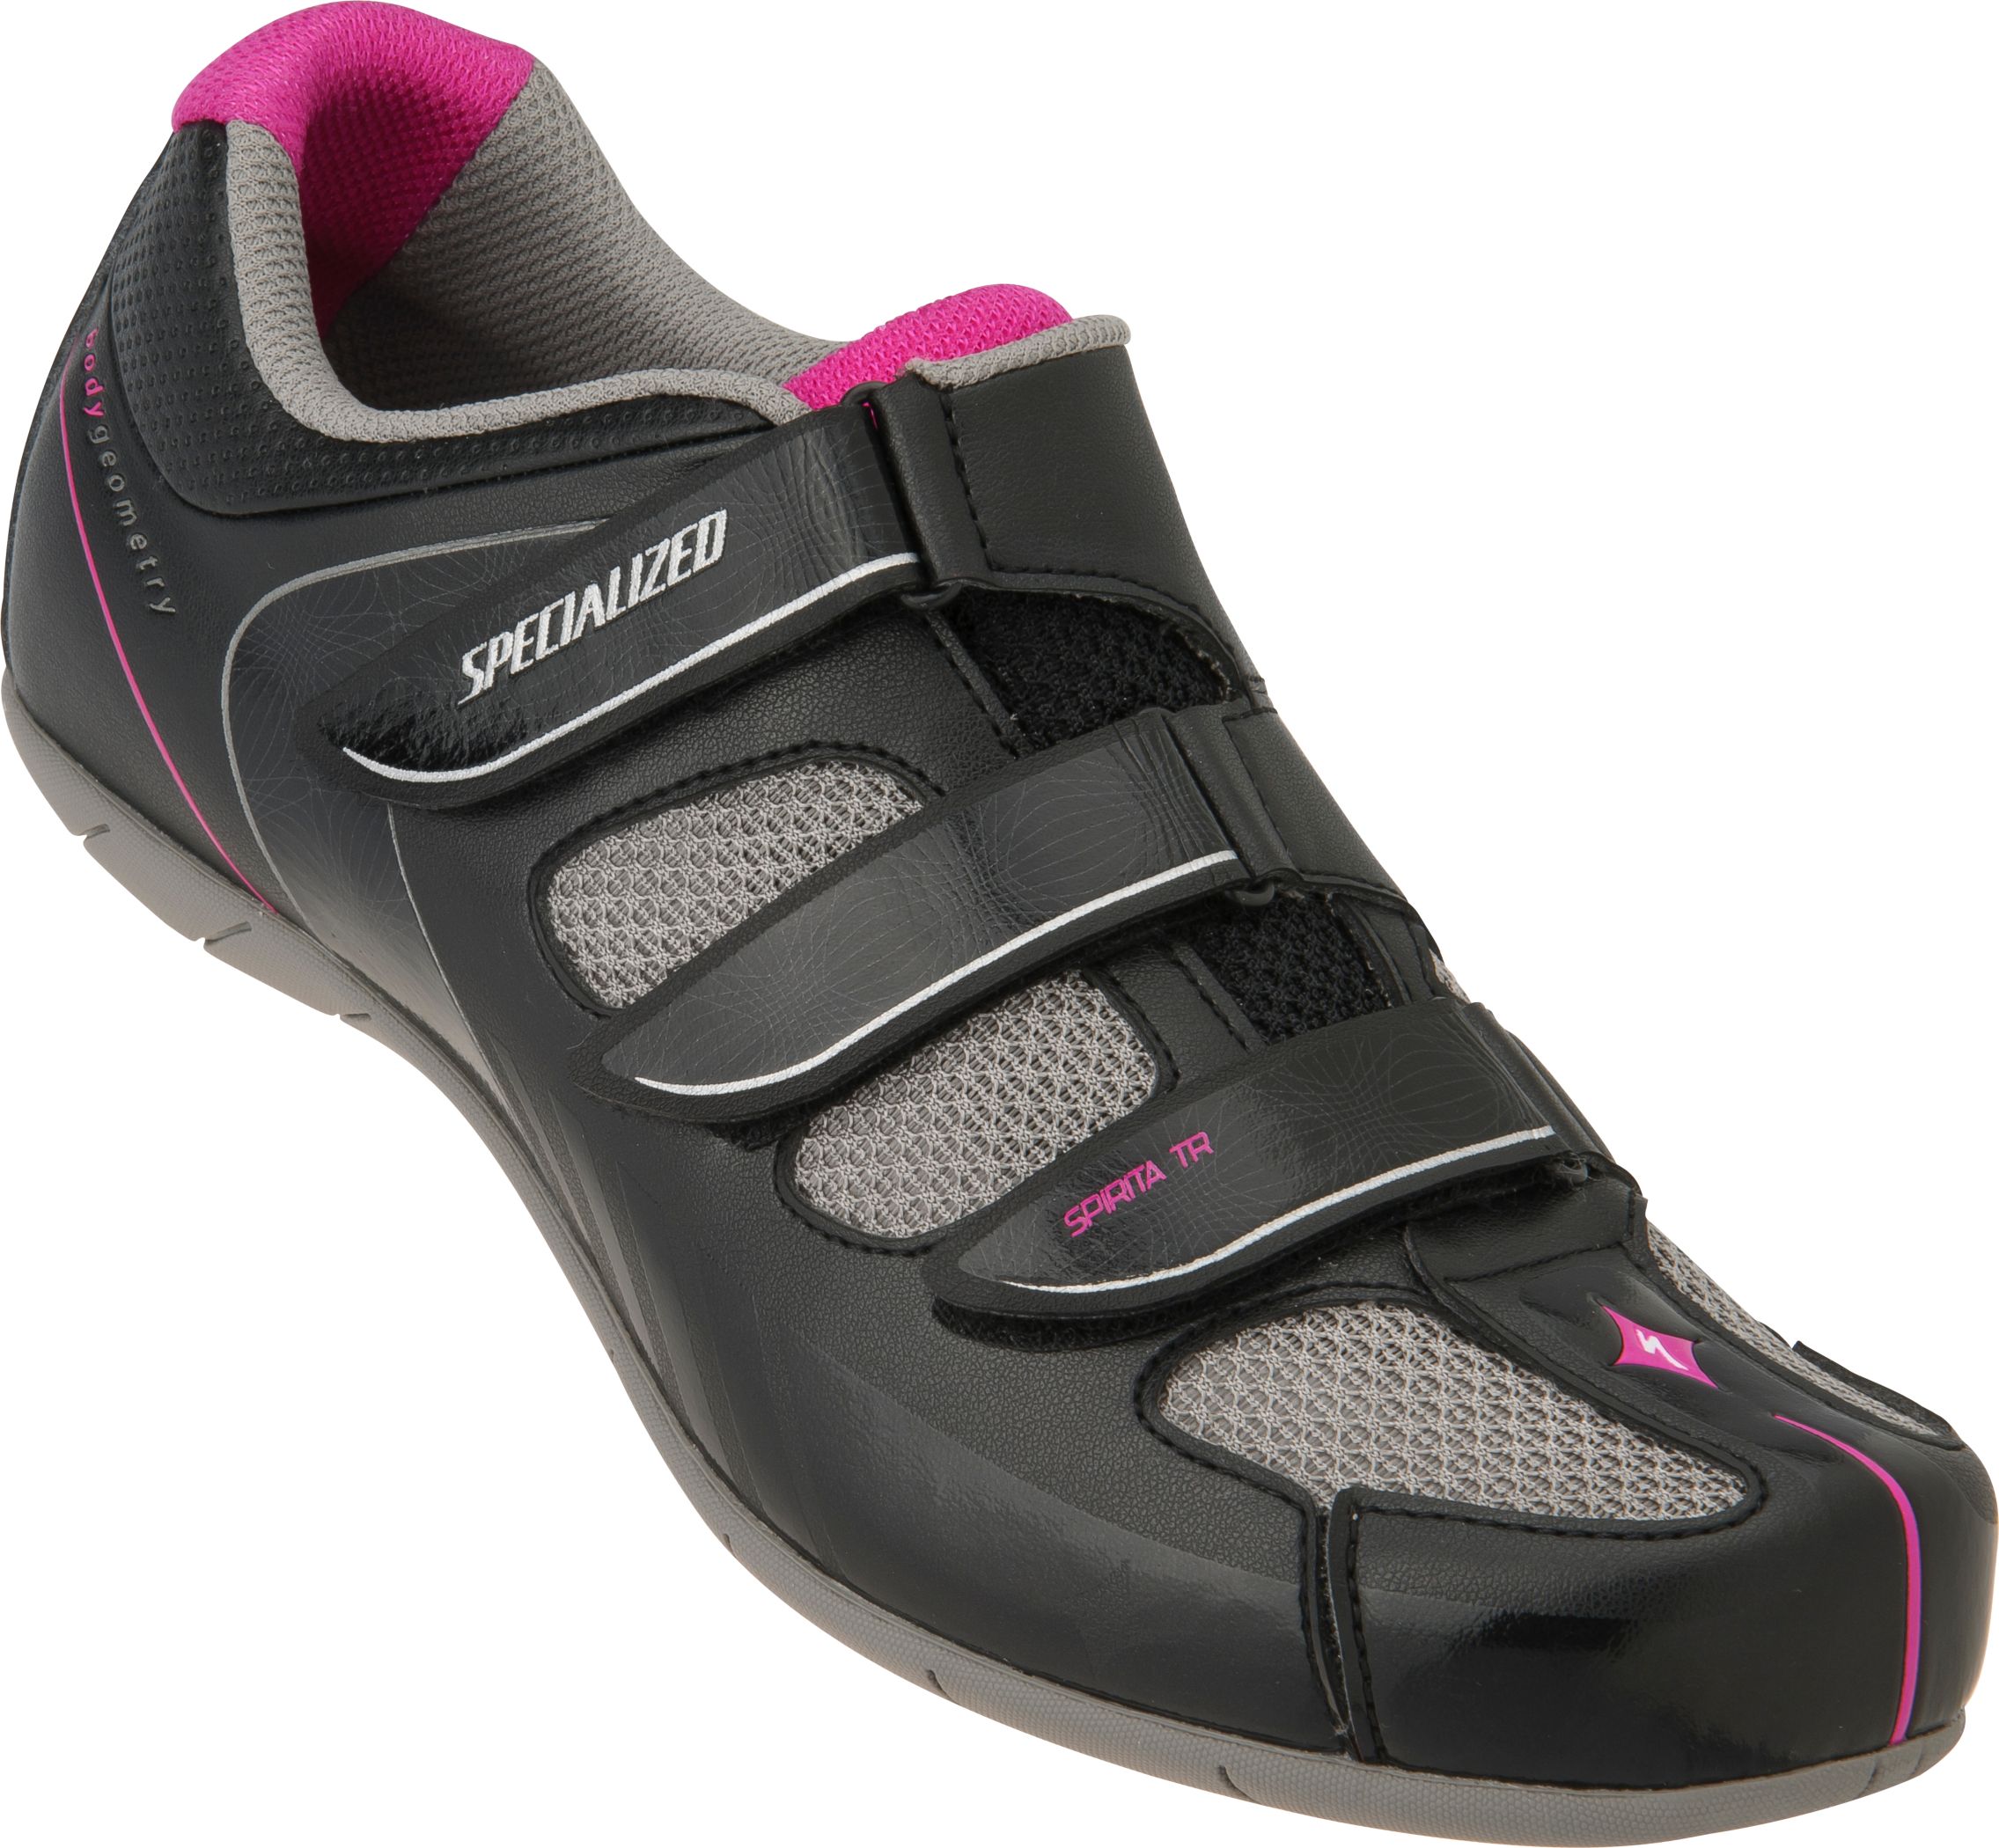 Specialized Womens Spirita Rbx Road Shoe Size 37 Only 2015 - Â£19.99 | Shoes - Womens Specific 